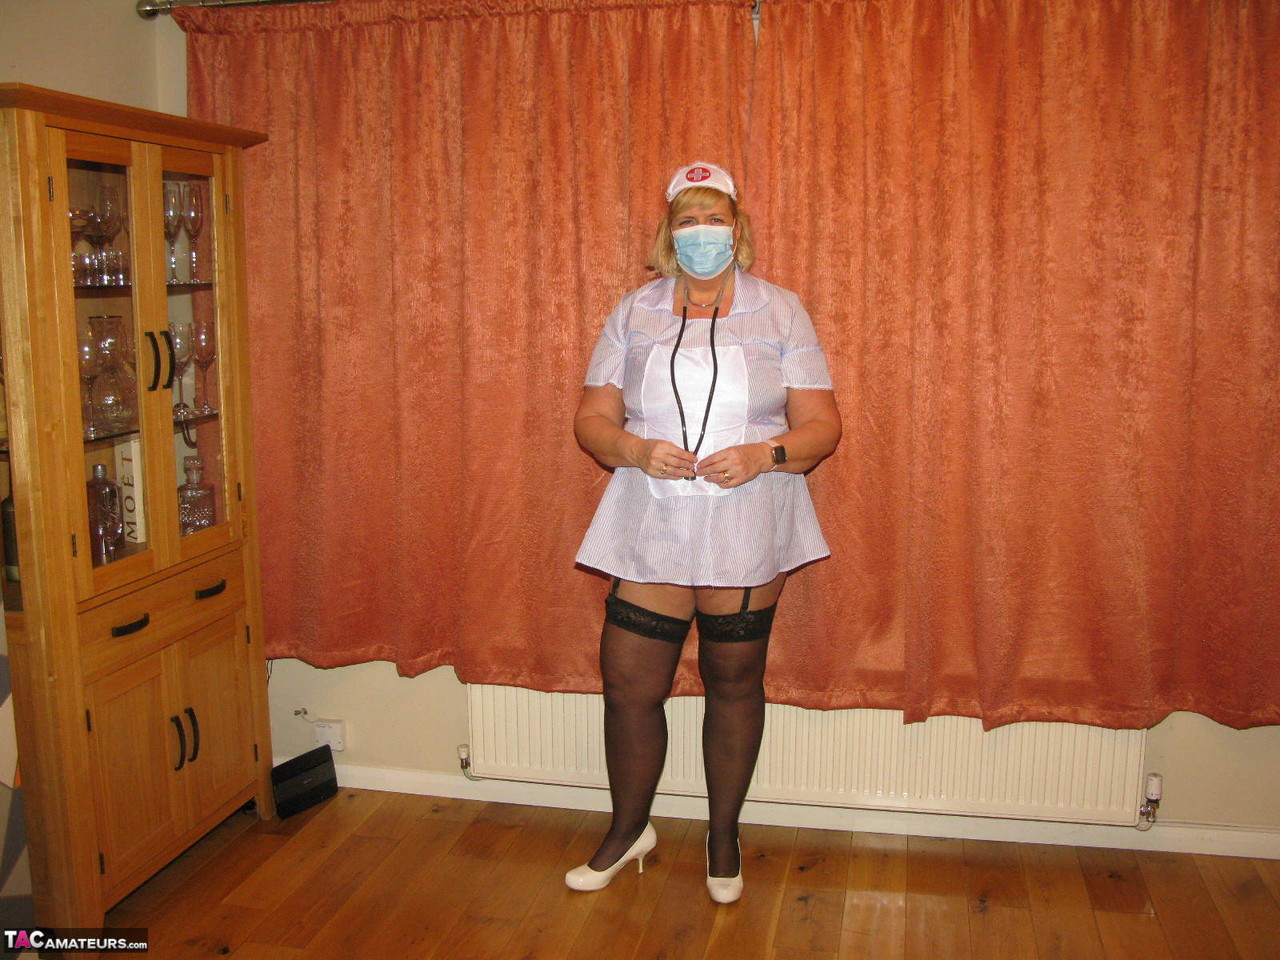 Fat nurse Chrissy Uk removes a surgical mask and uniform to model lingerie foto porno #424682136